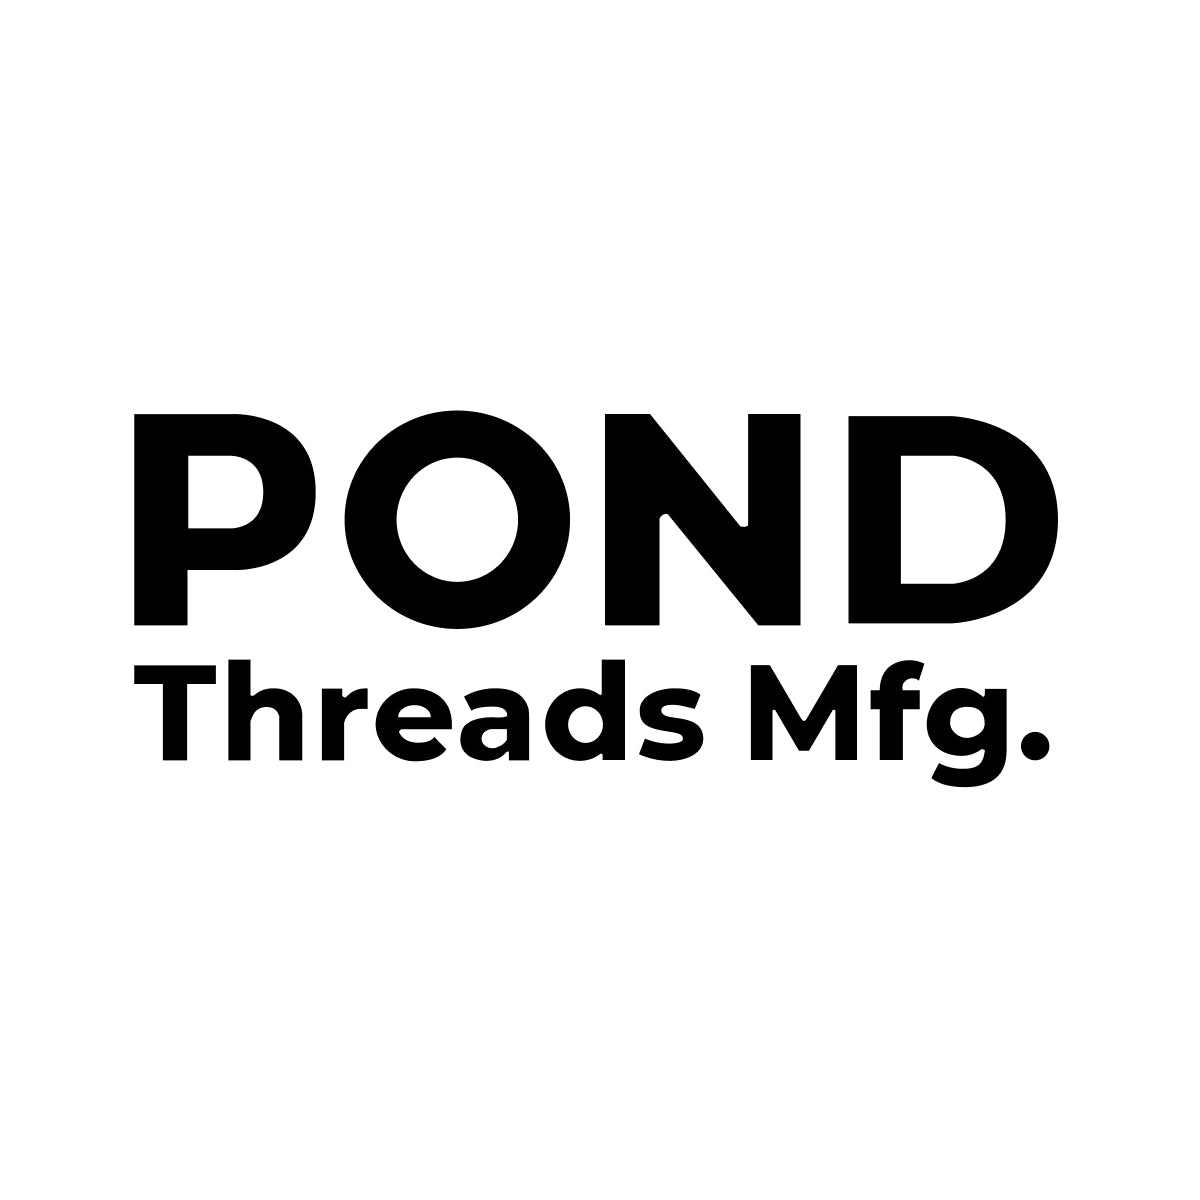 Hire Shopify Experts to integrate Pond Threads app into a Shopify store